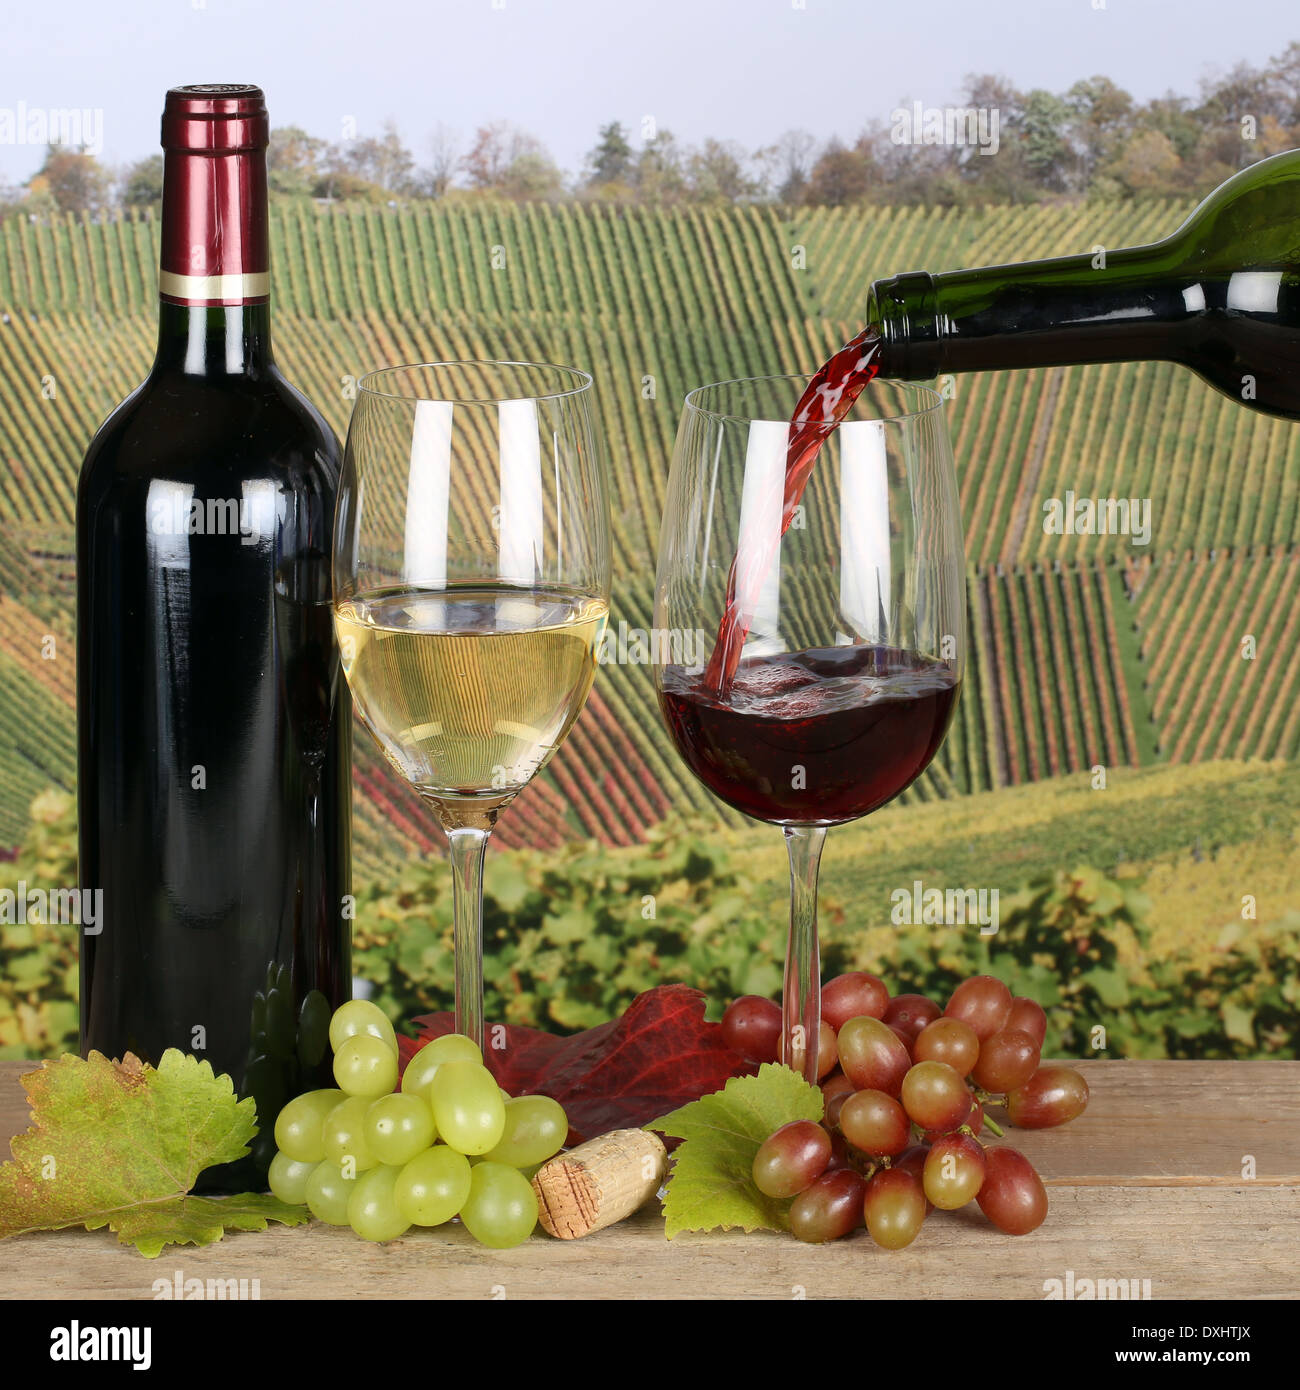 Fresh wine pouring from a bottle into a glass in the vineyards Stock Photo